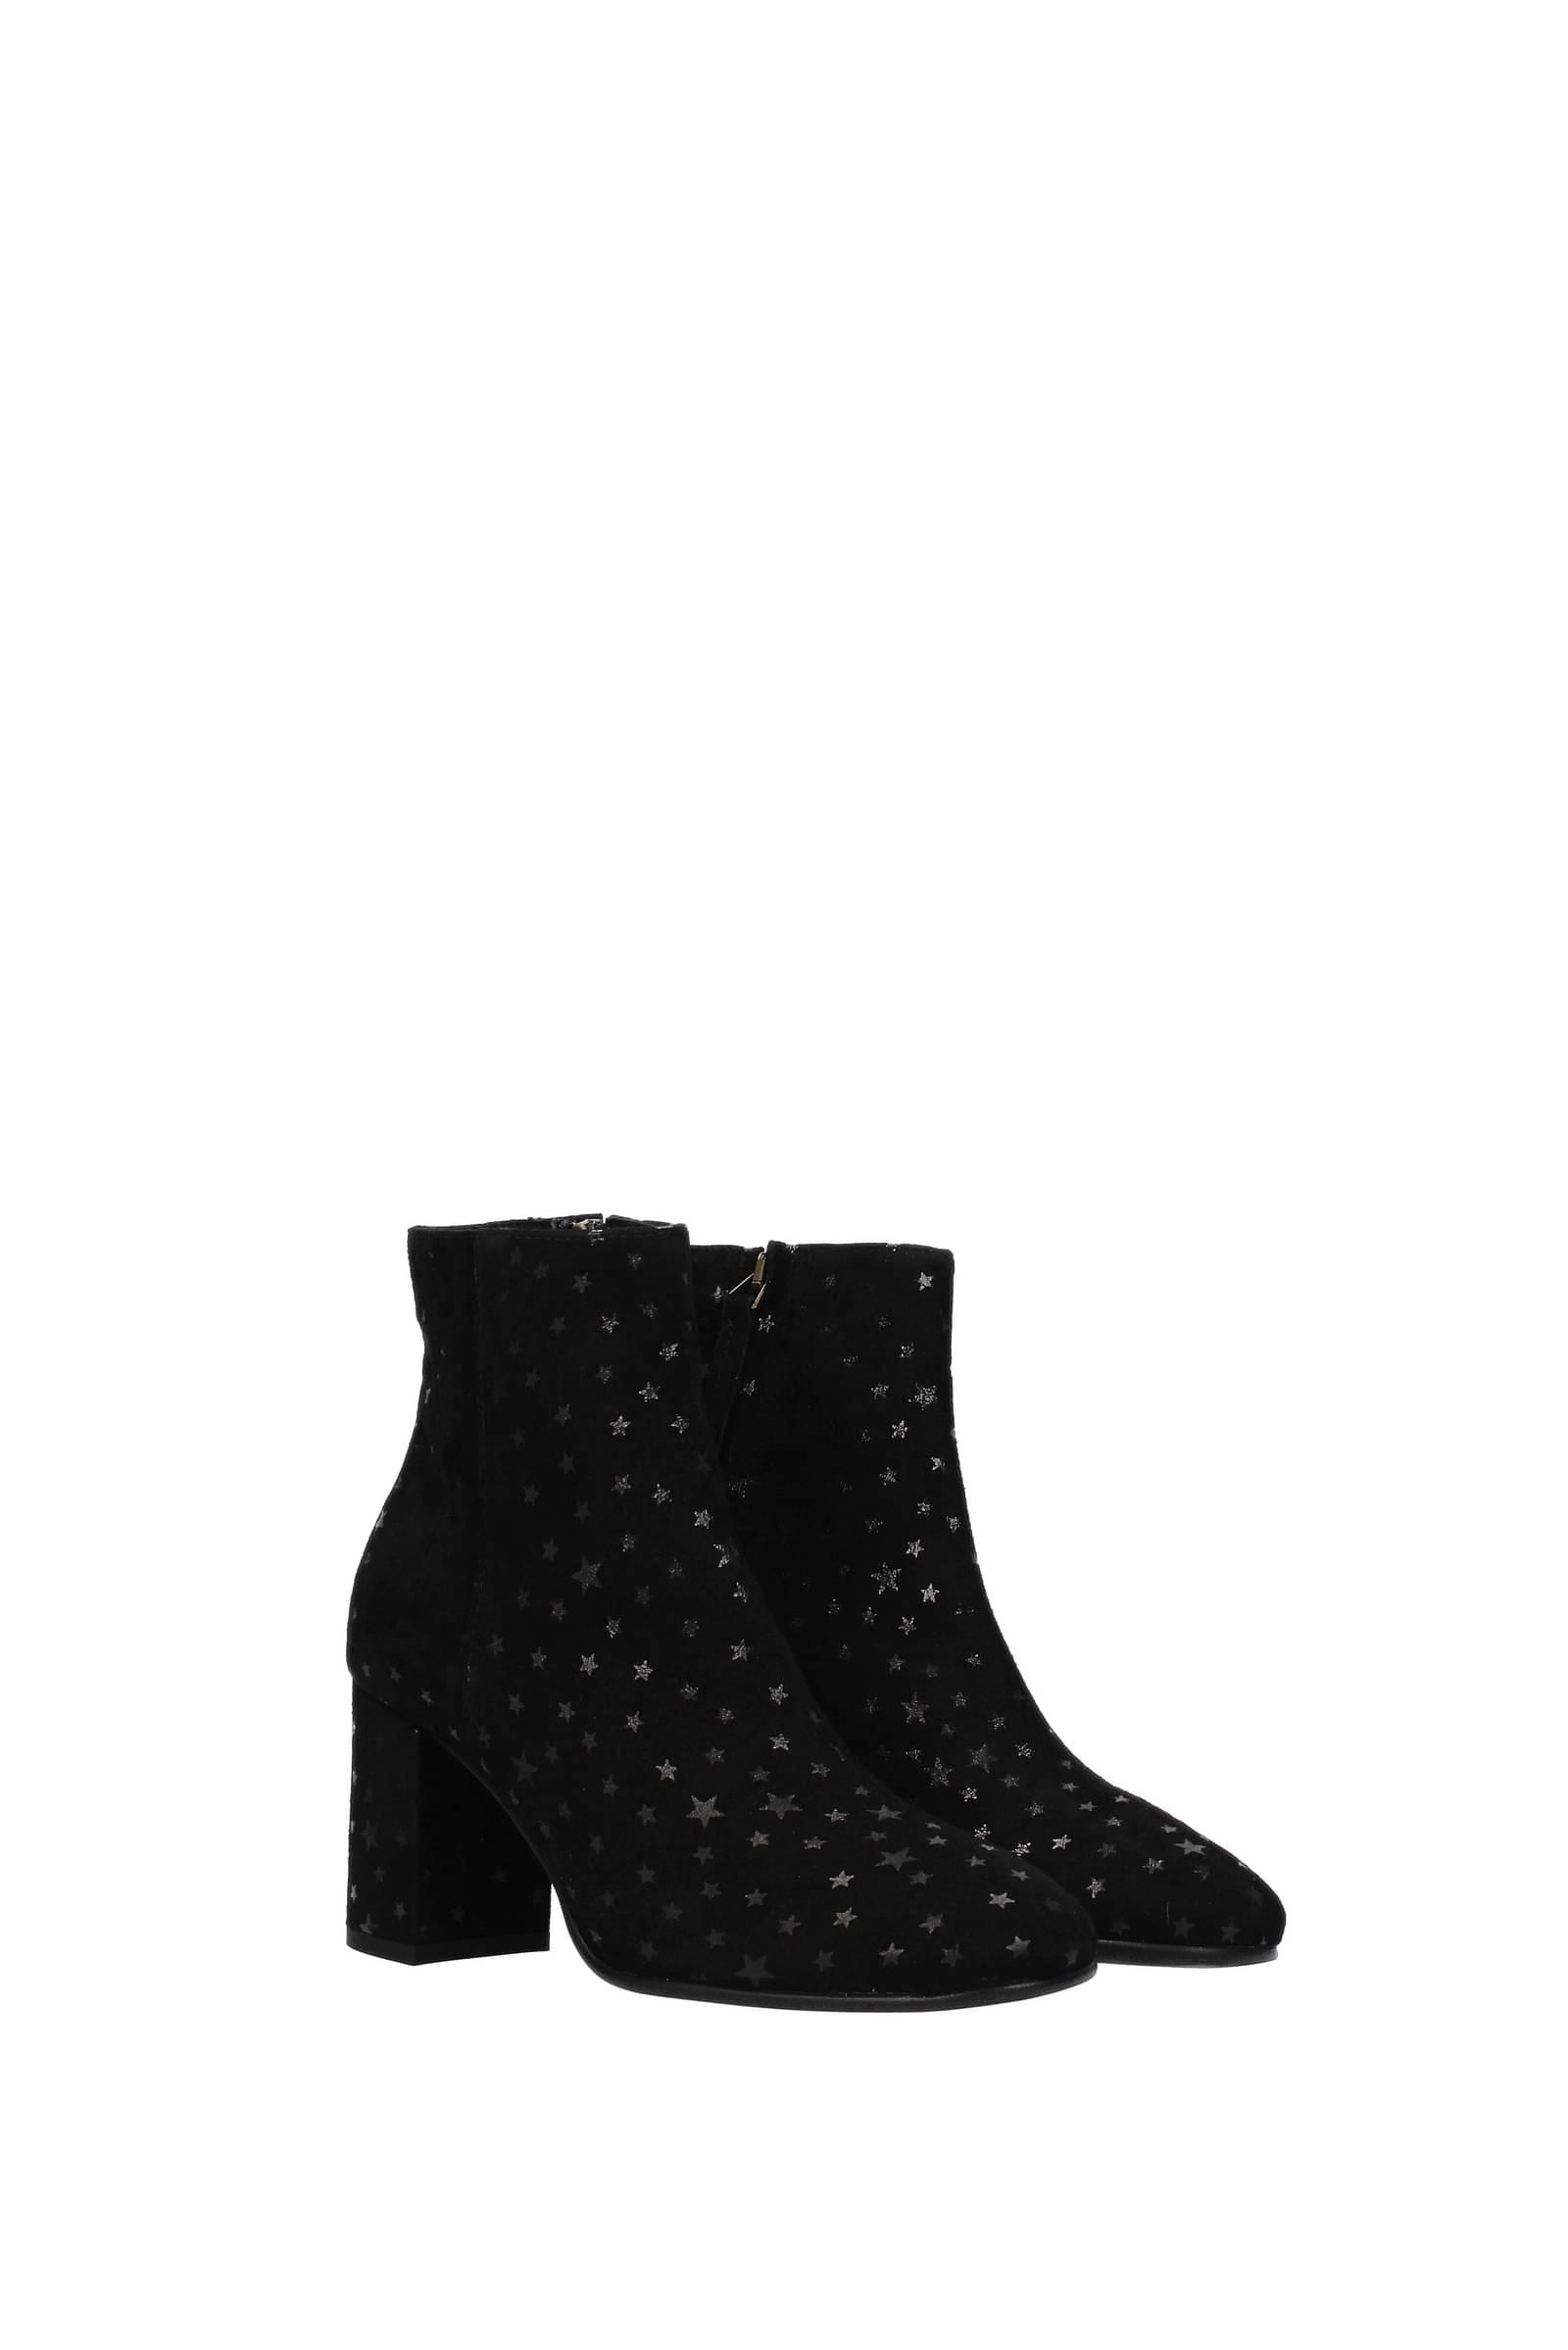 P.A.R.O.S.H. Ankle Boots Blink Suede Black | Lyst